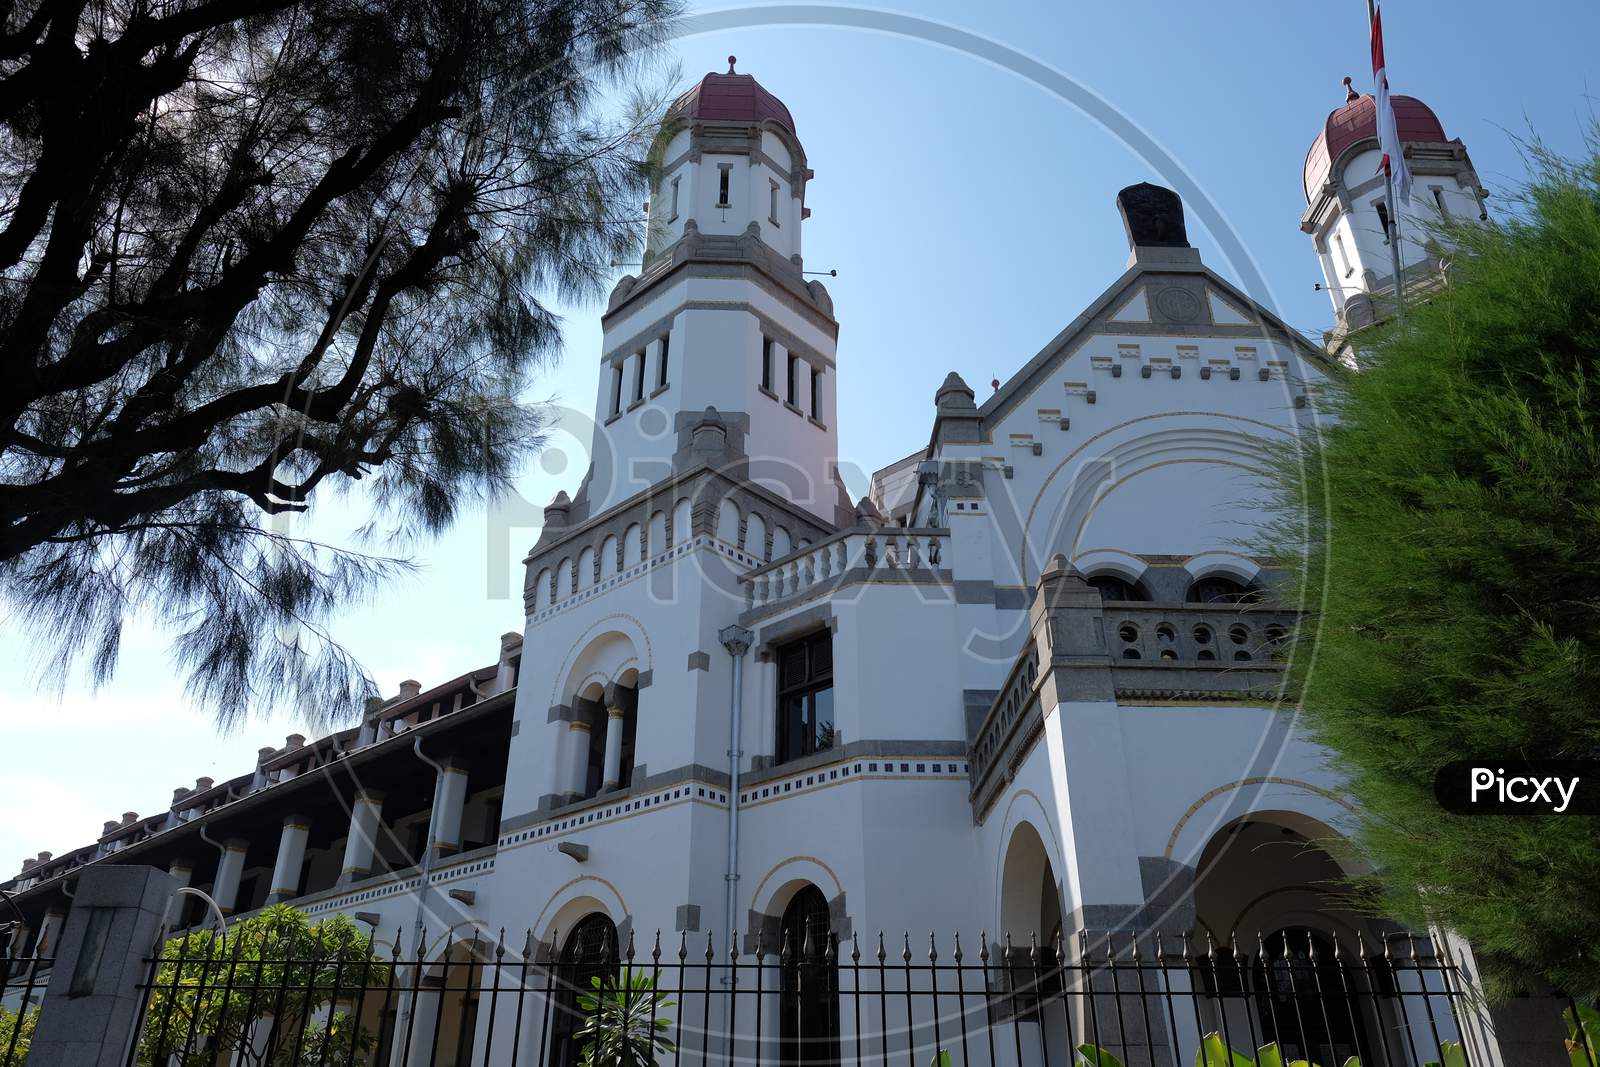 Lawang Sewu is a historic building in the city of Semarang, Central Java, Indonesia.